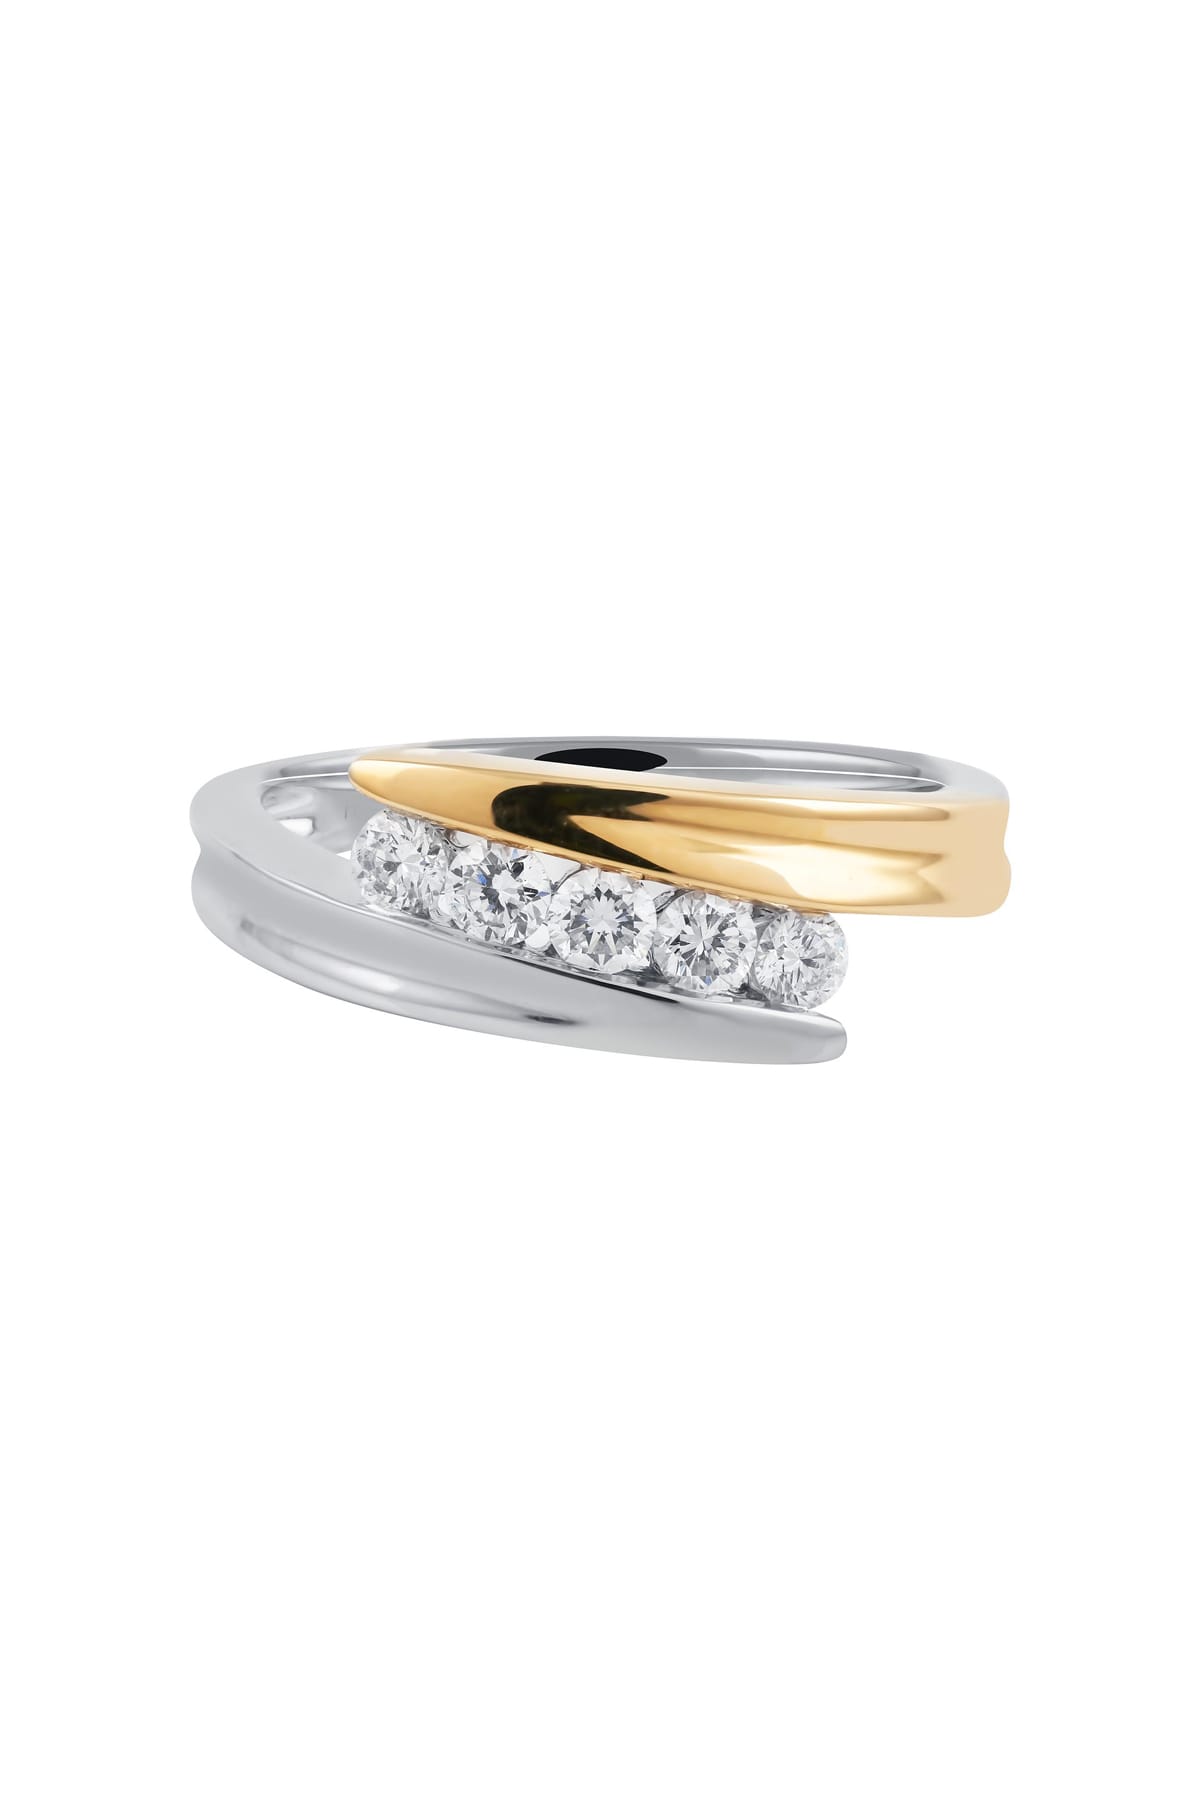 Offset Style Diamond Ring set in 18ct Yellow and White Gold available at LeGassick Diamonds and Jewellery Gold Coast, Australia.